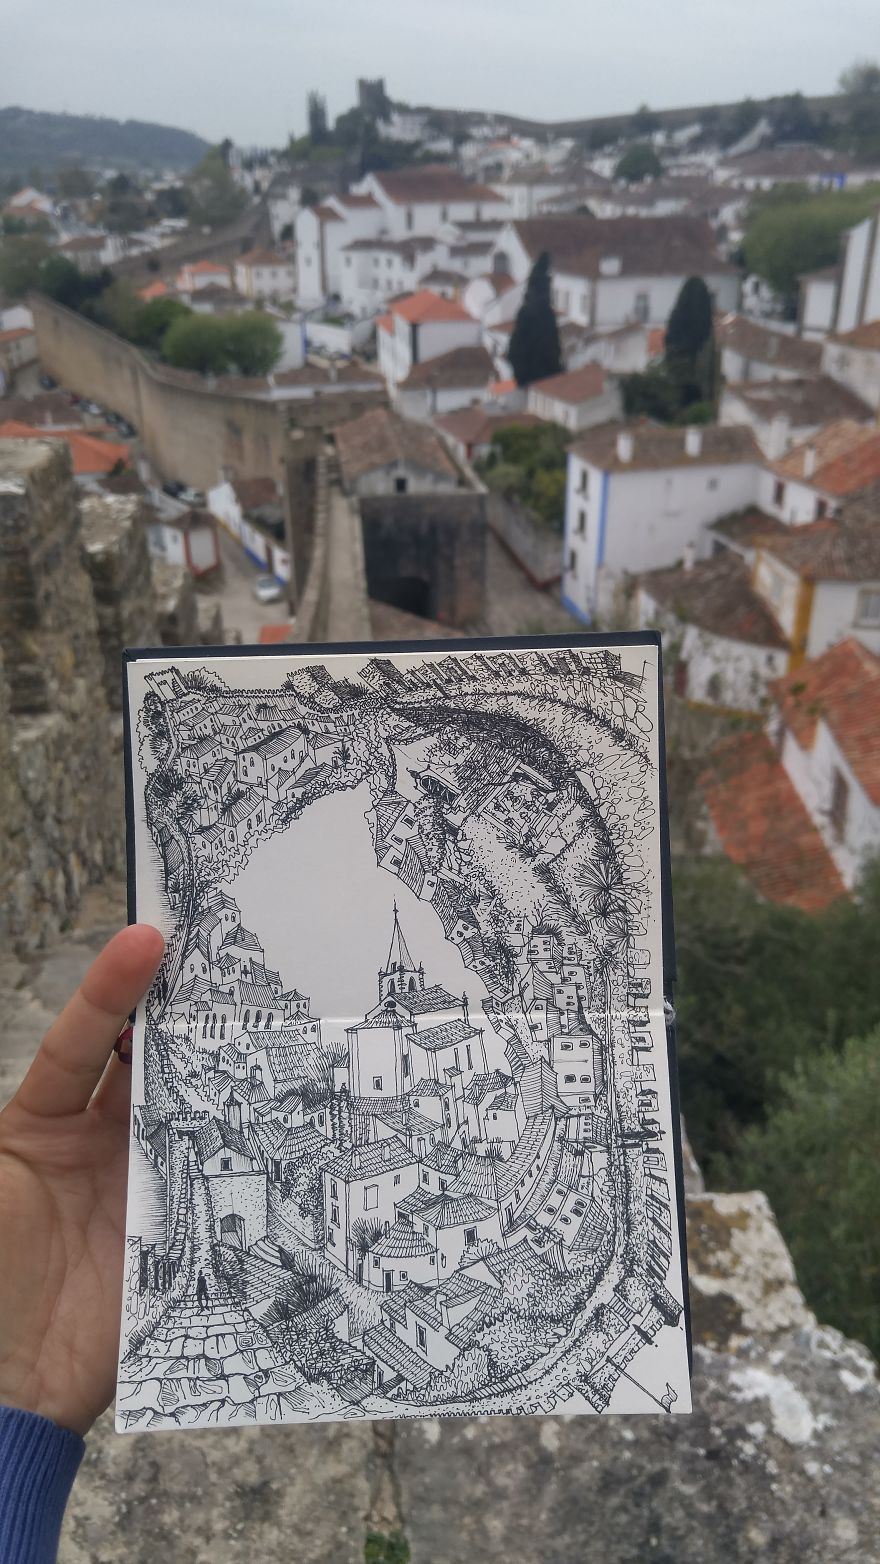 One Of My Absolute Favourite Compositions Depicting The City Of Obidos, Portugal With The Castel Walls Surrounding The Old Town